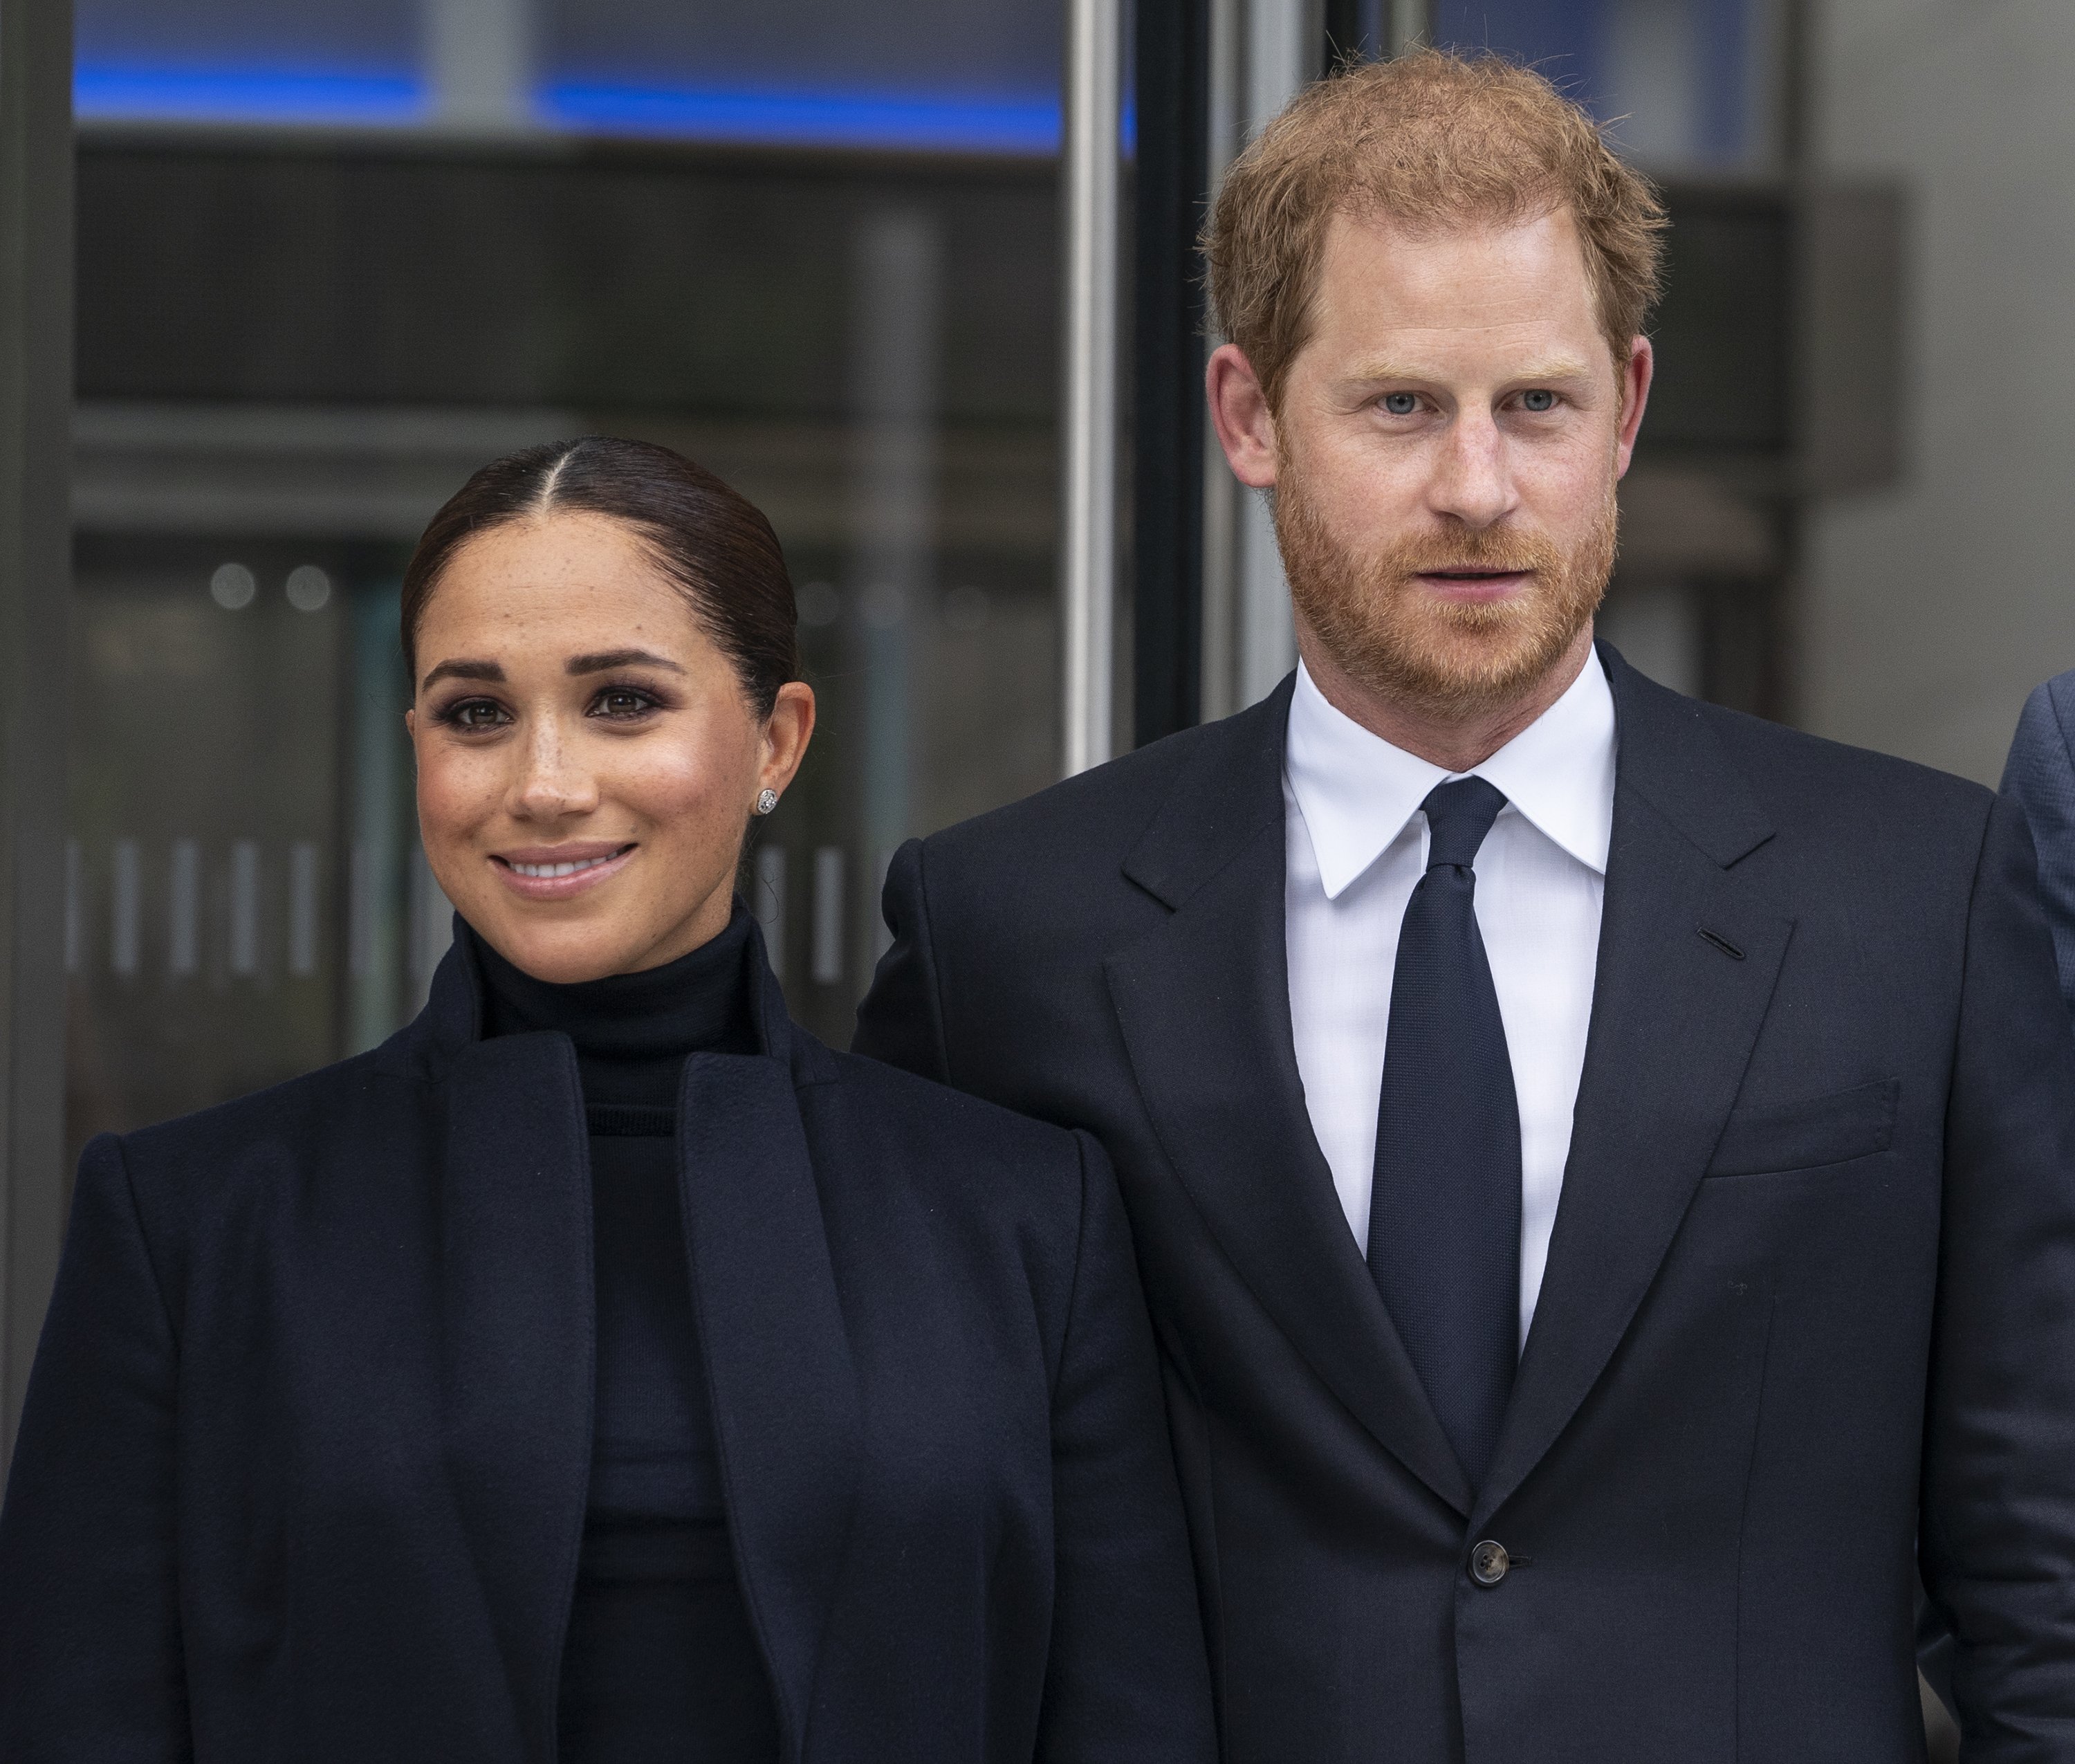 Prince Harry and Meghan Markle visit One World Observatory on the 102nd floor of the Freedom Tower of the World Trade Center on September 23, 2021 in New York, United States |  Source: Getty Images